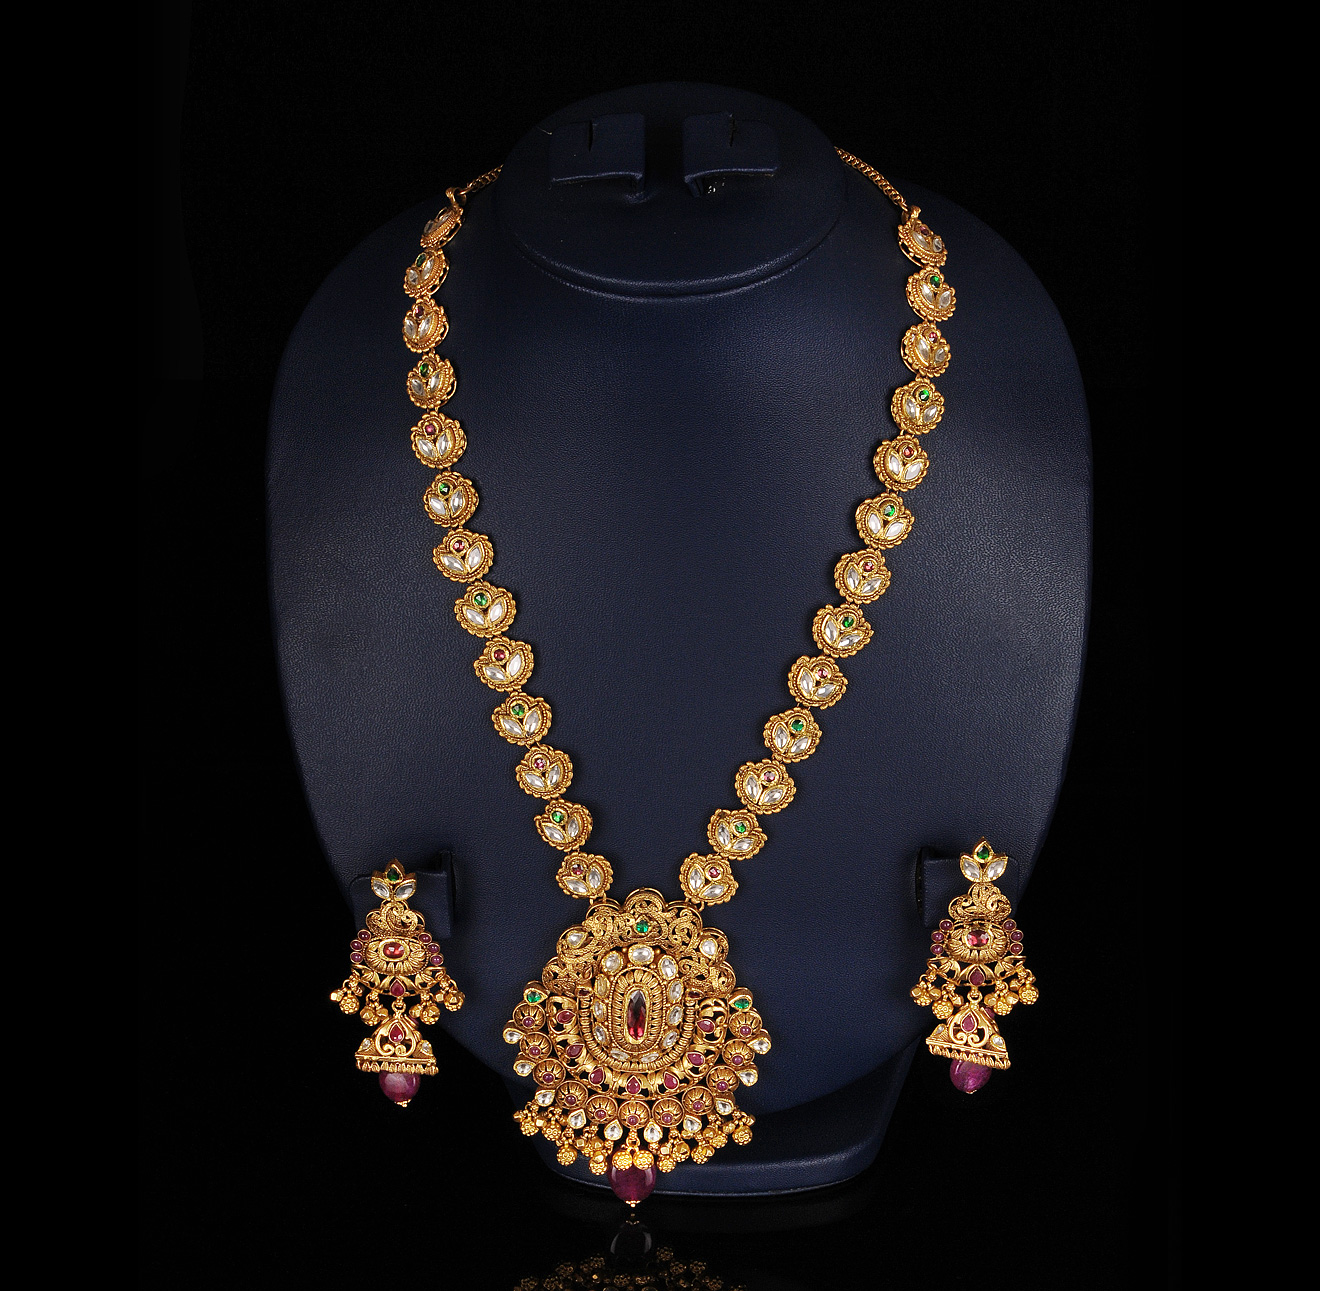 gold-and-diamond-jewellery-designs-beautiful-antique-bridal-necklace